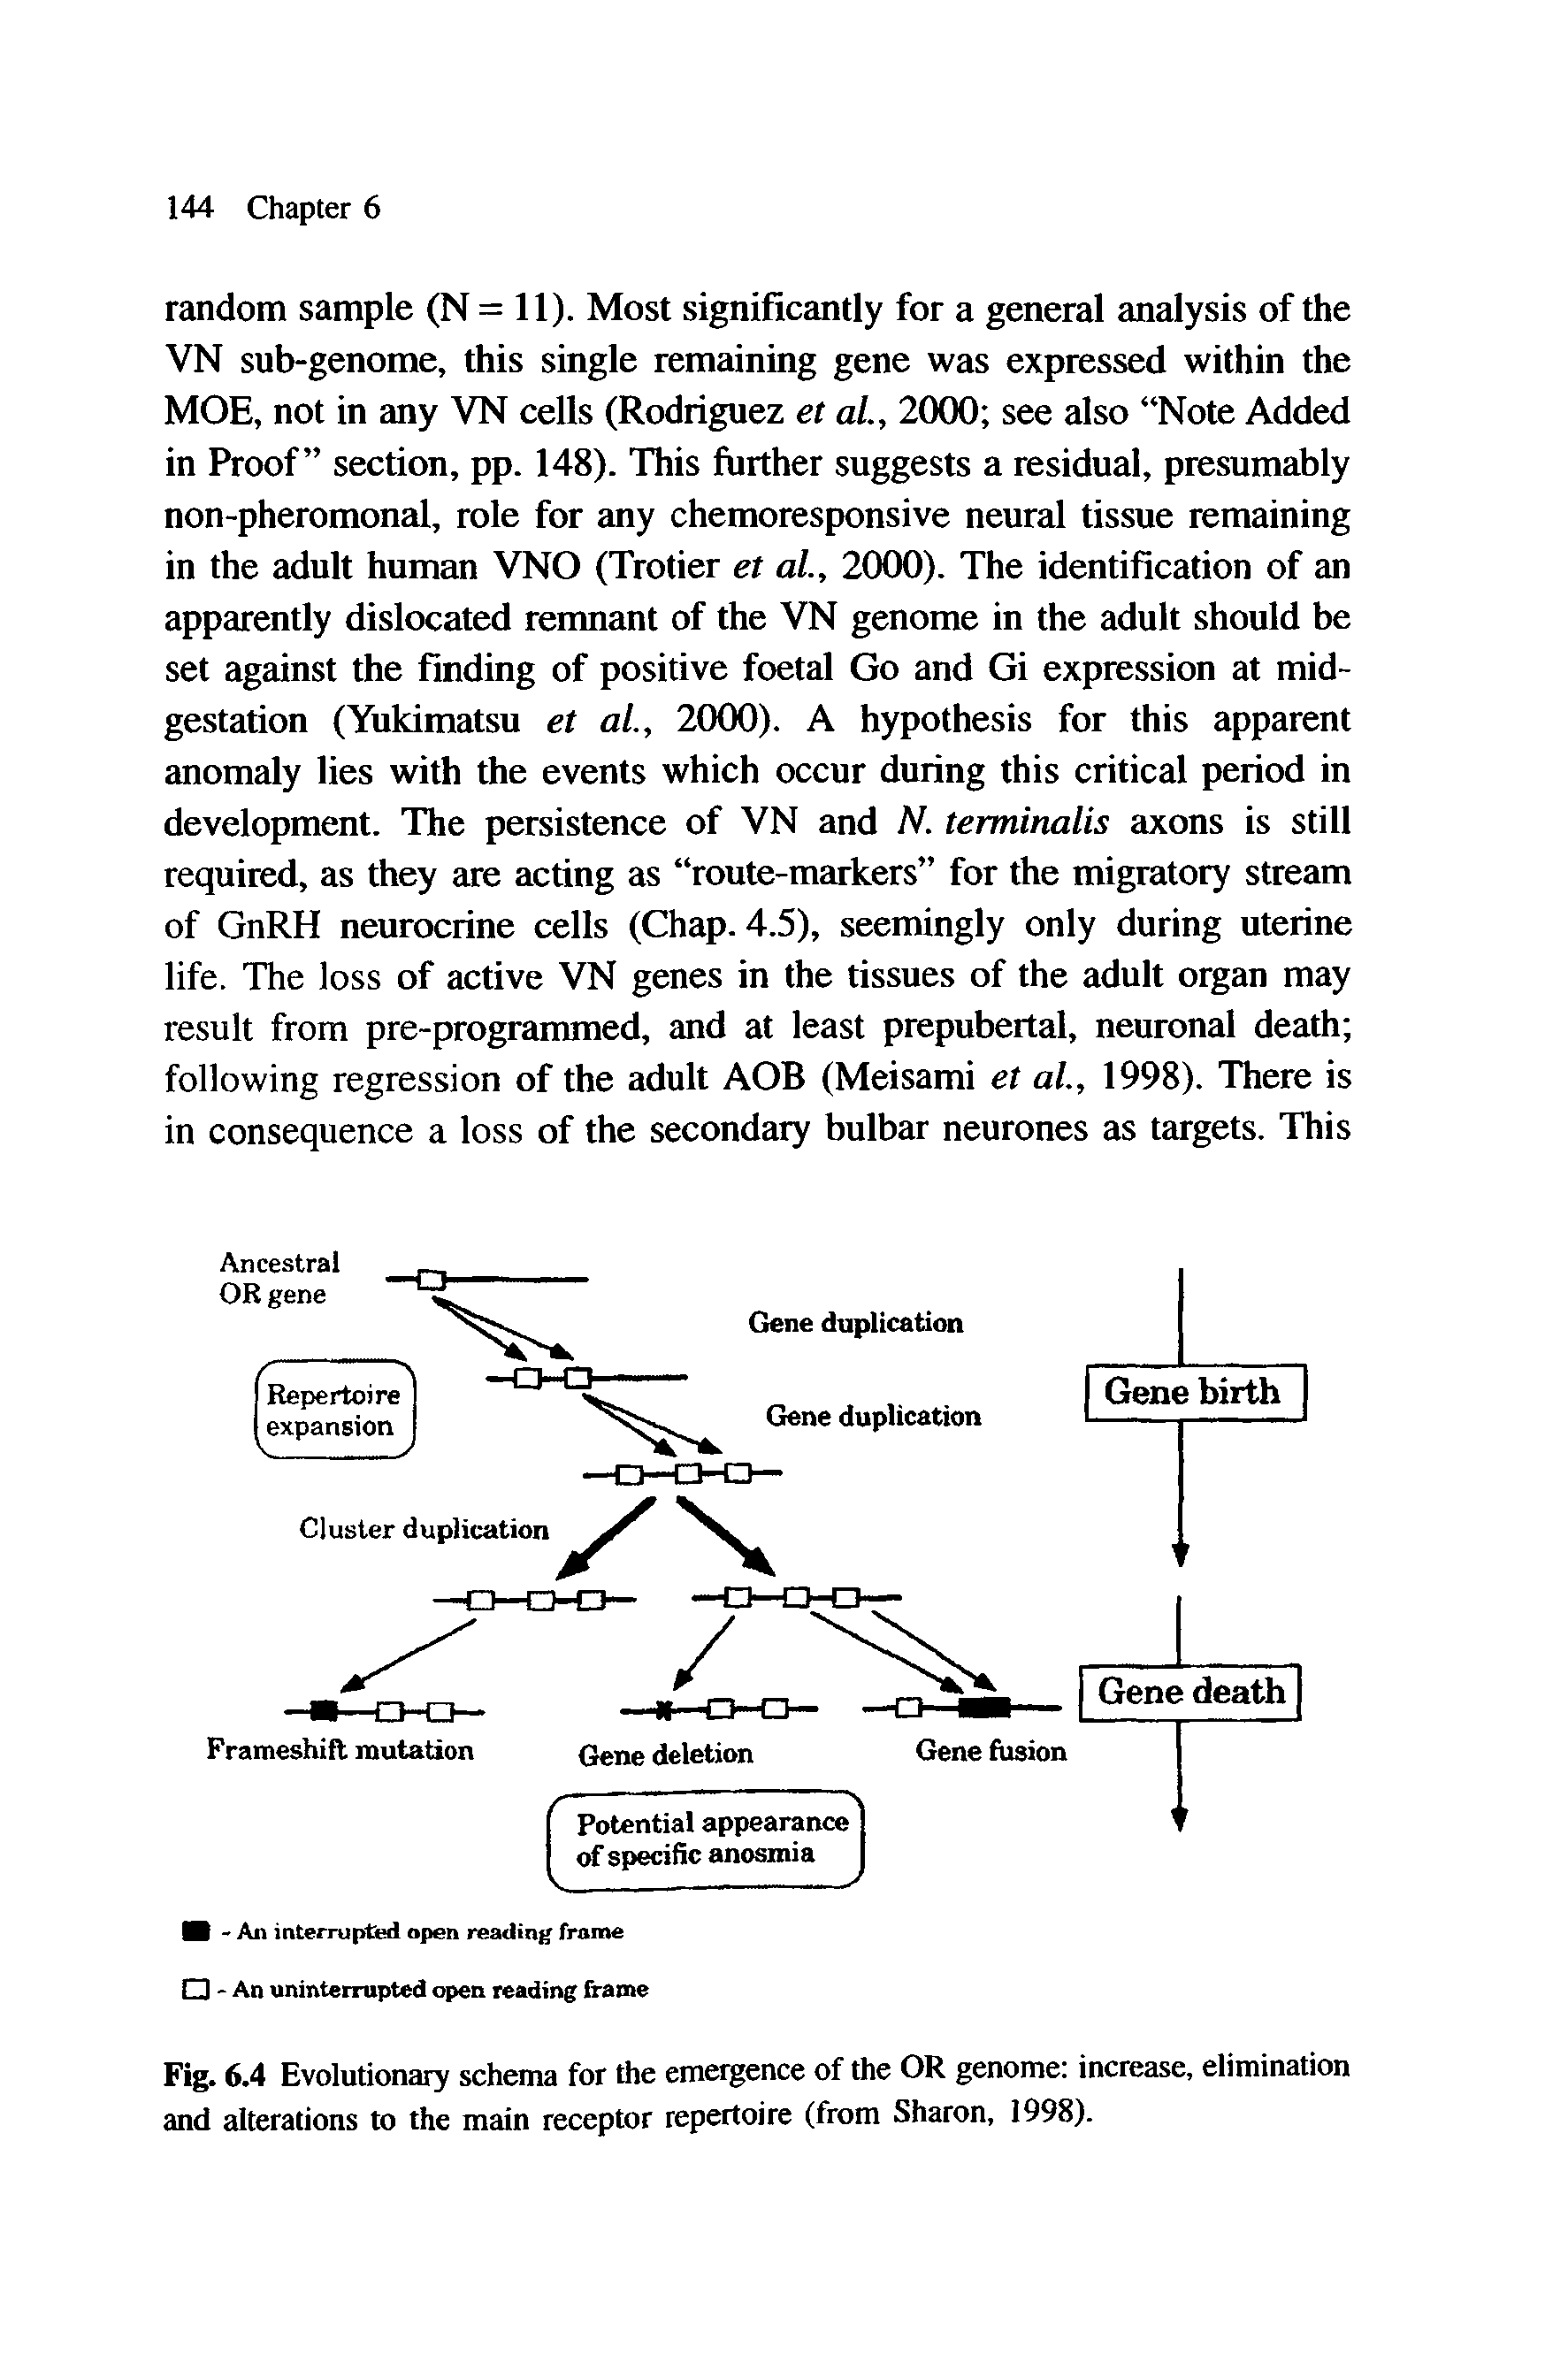 Fig. 6.4 Evolutionary schema for the emergence of the OR genome increase, elimination and alterations to the main receptor repertoire (from Sharon, 1998).